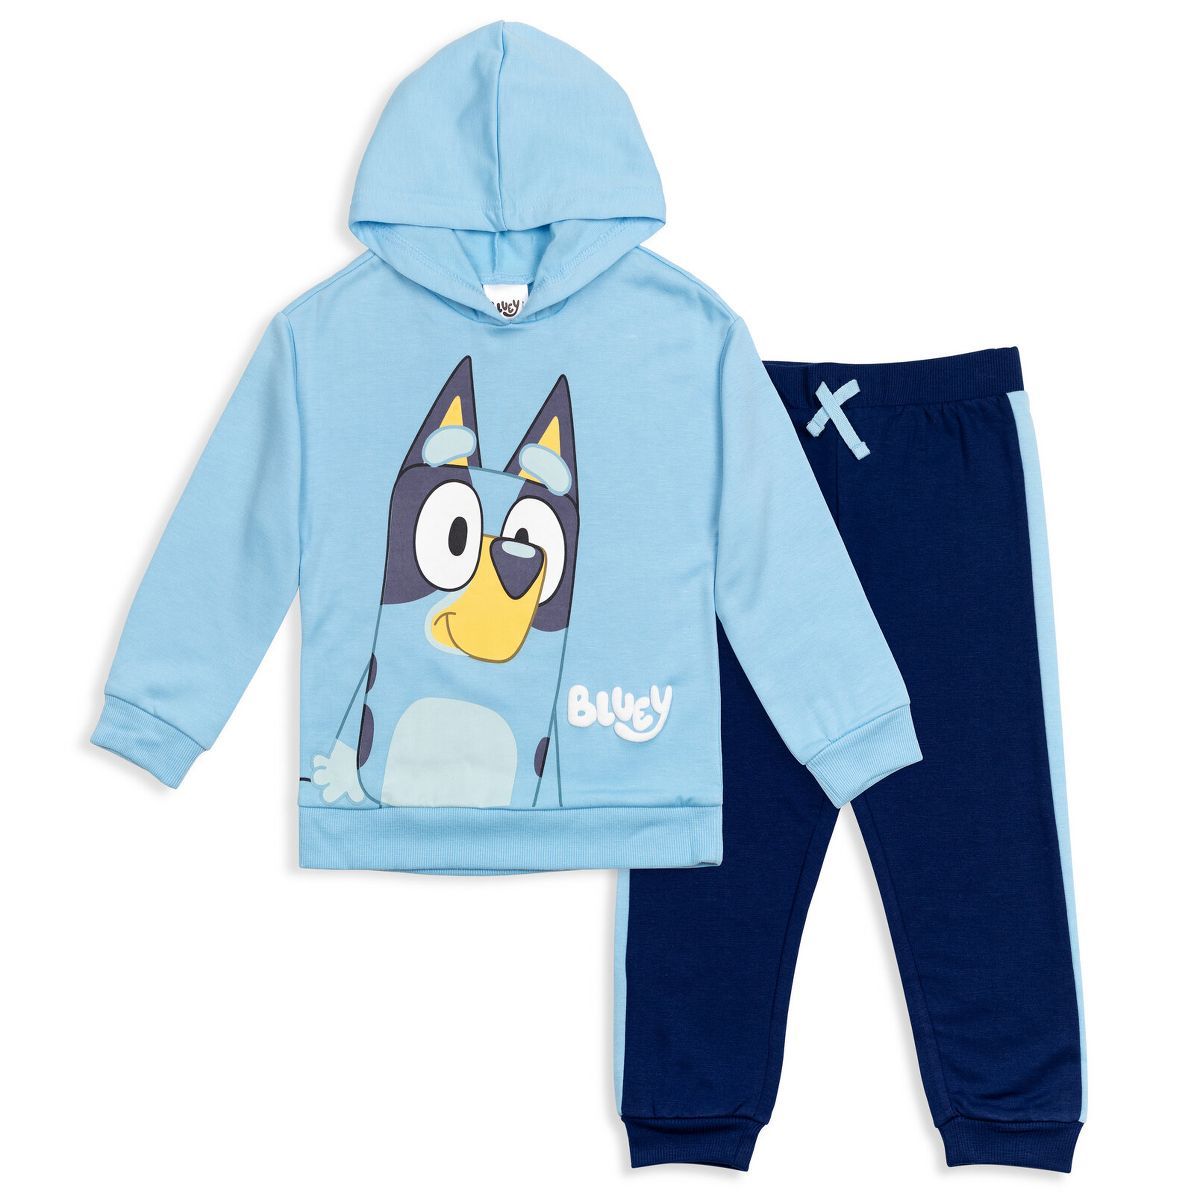 Bluey Fleece Hoodie and Pants Outfit Set Toddler to Big Kid | Target